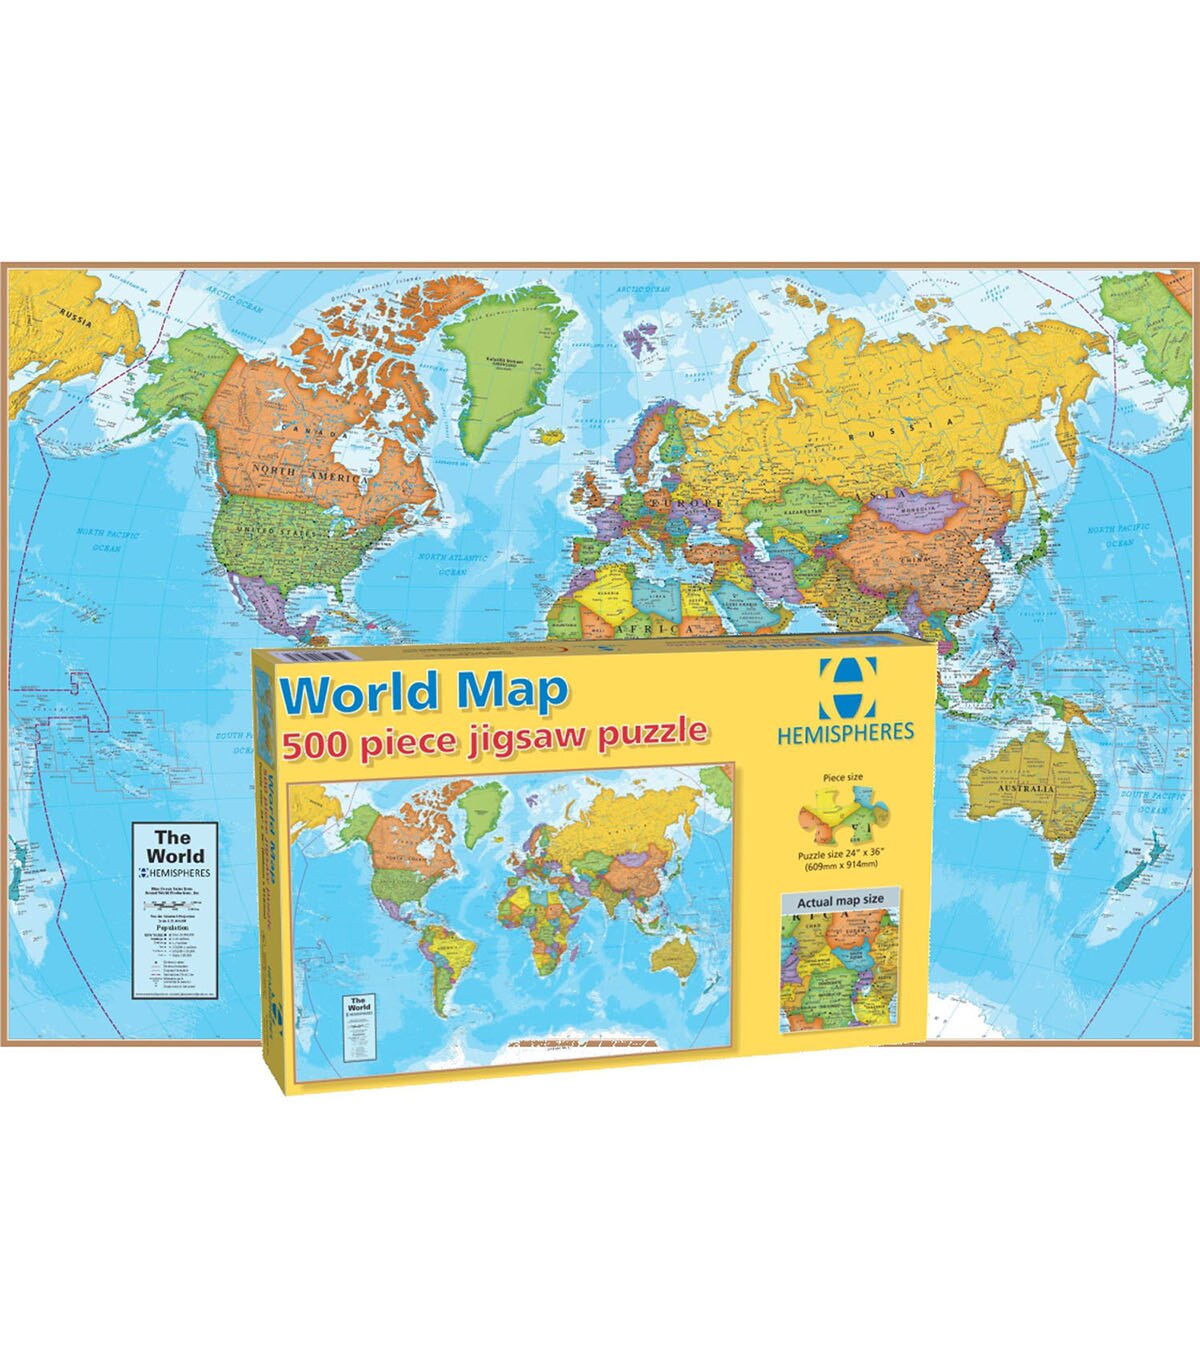 world map jigsaw puzzle for adults World Map International 500 Piece Jigsaw Puzzle Joann world map jigsaw puzzle for adults